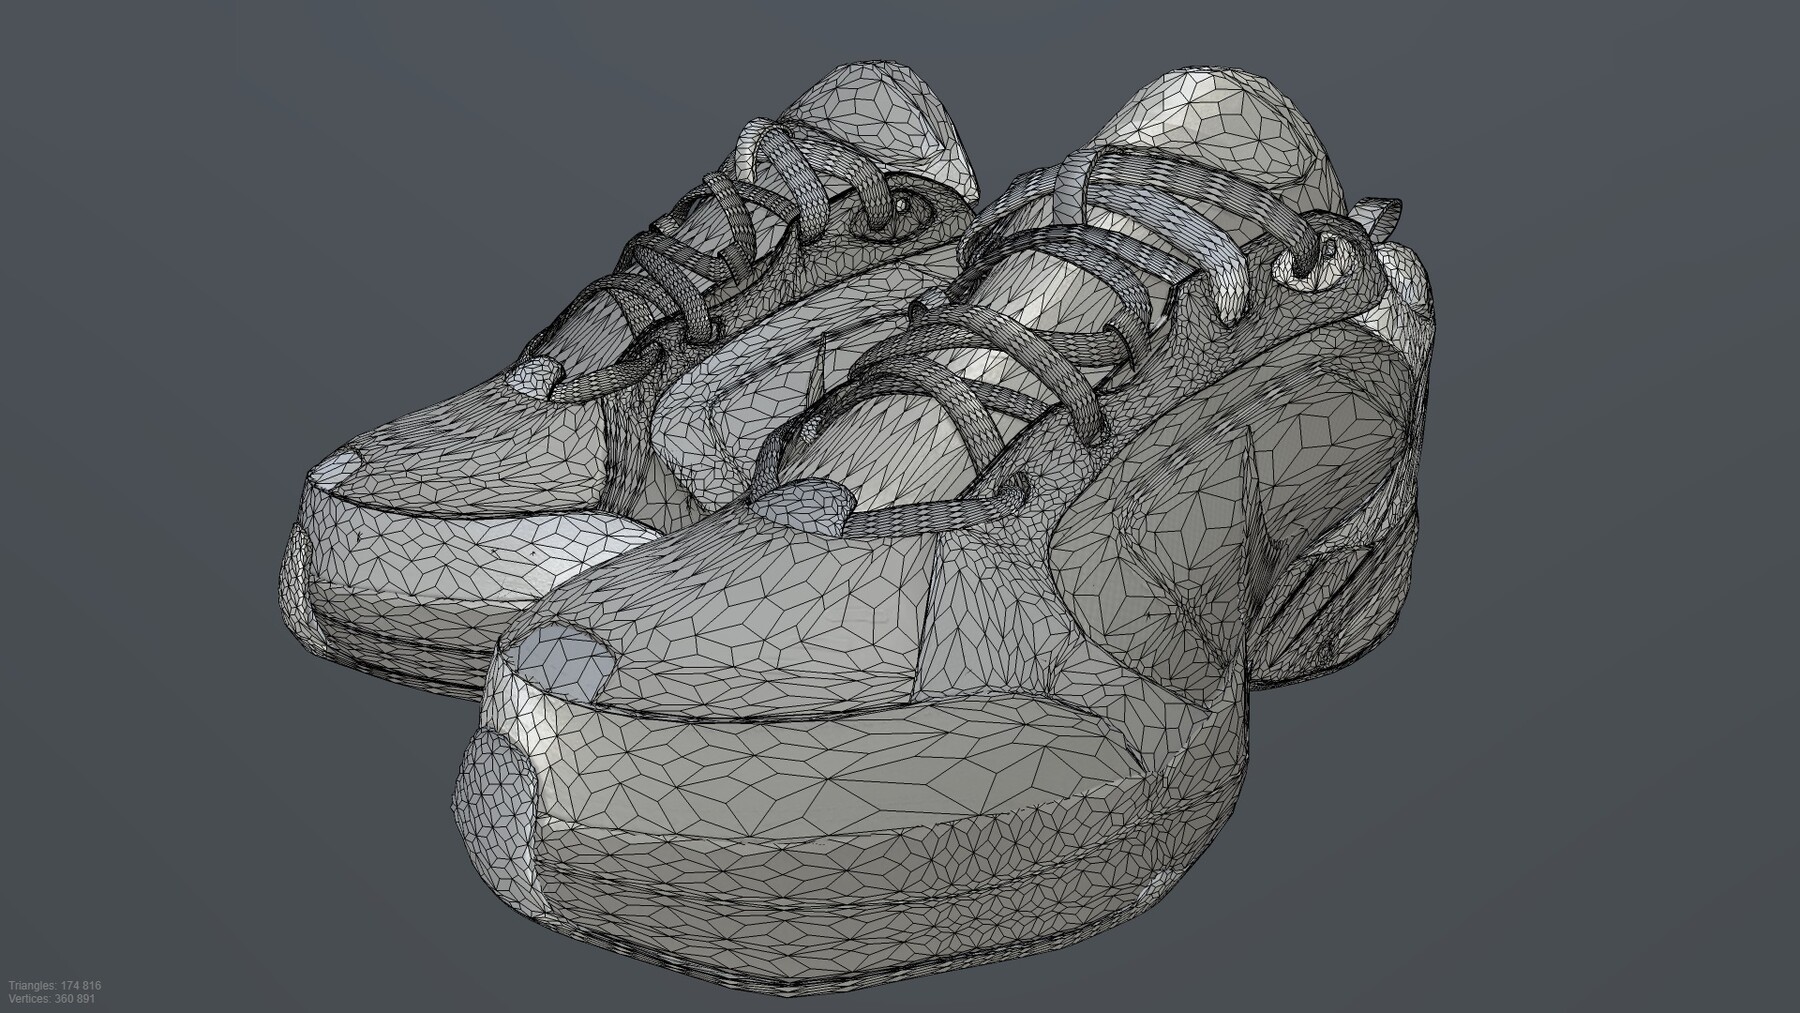 ArtStation - NIKE AIR MONARCH VI SHOES low-poly PBR | Game Assets